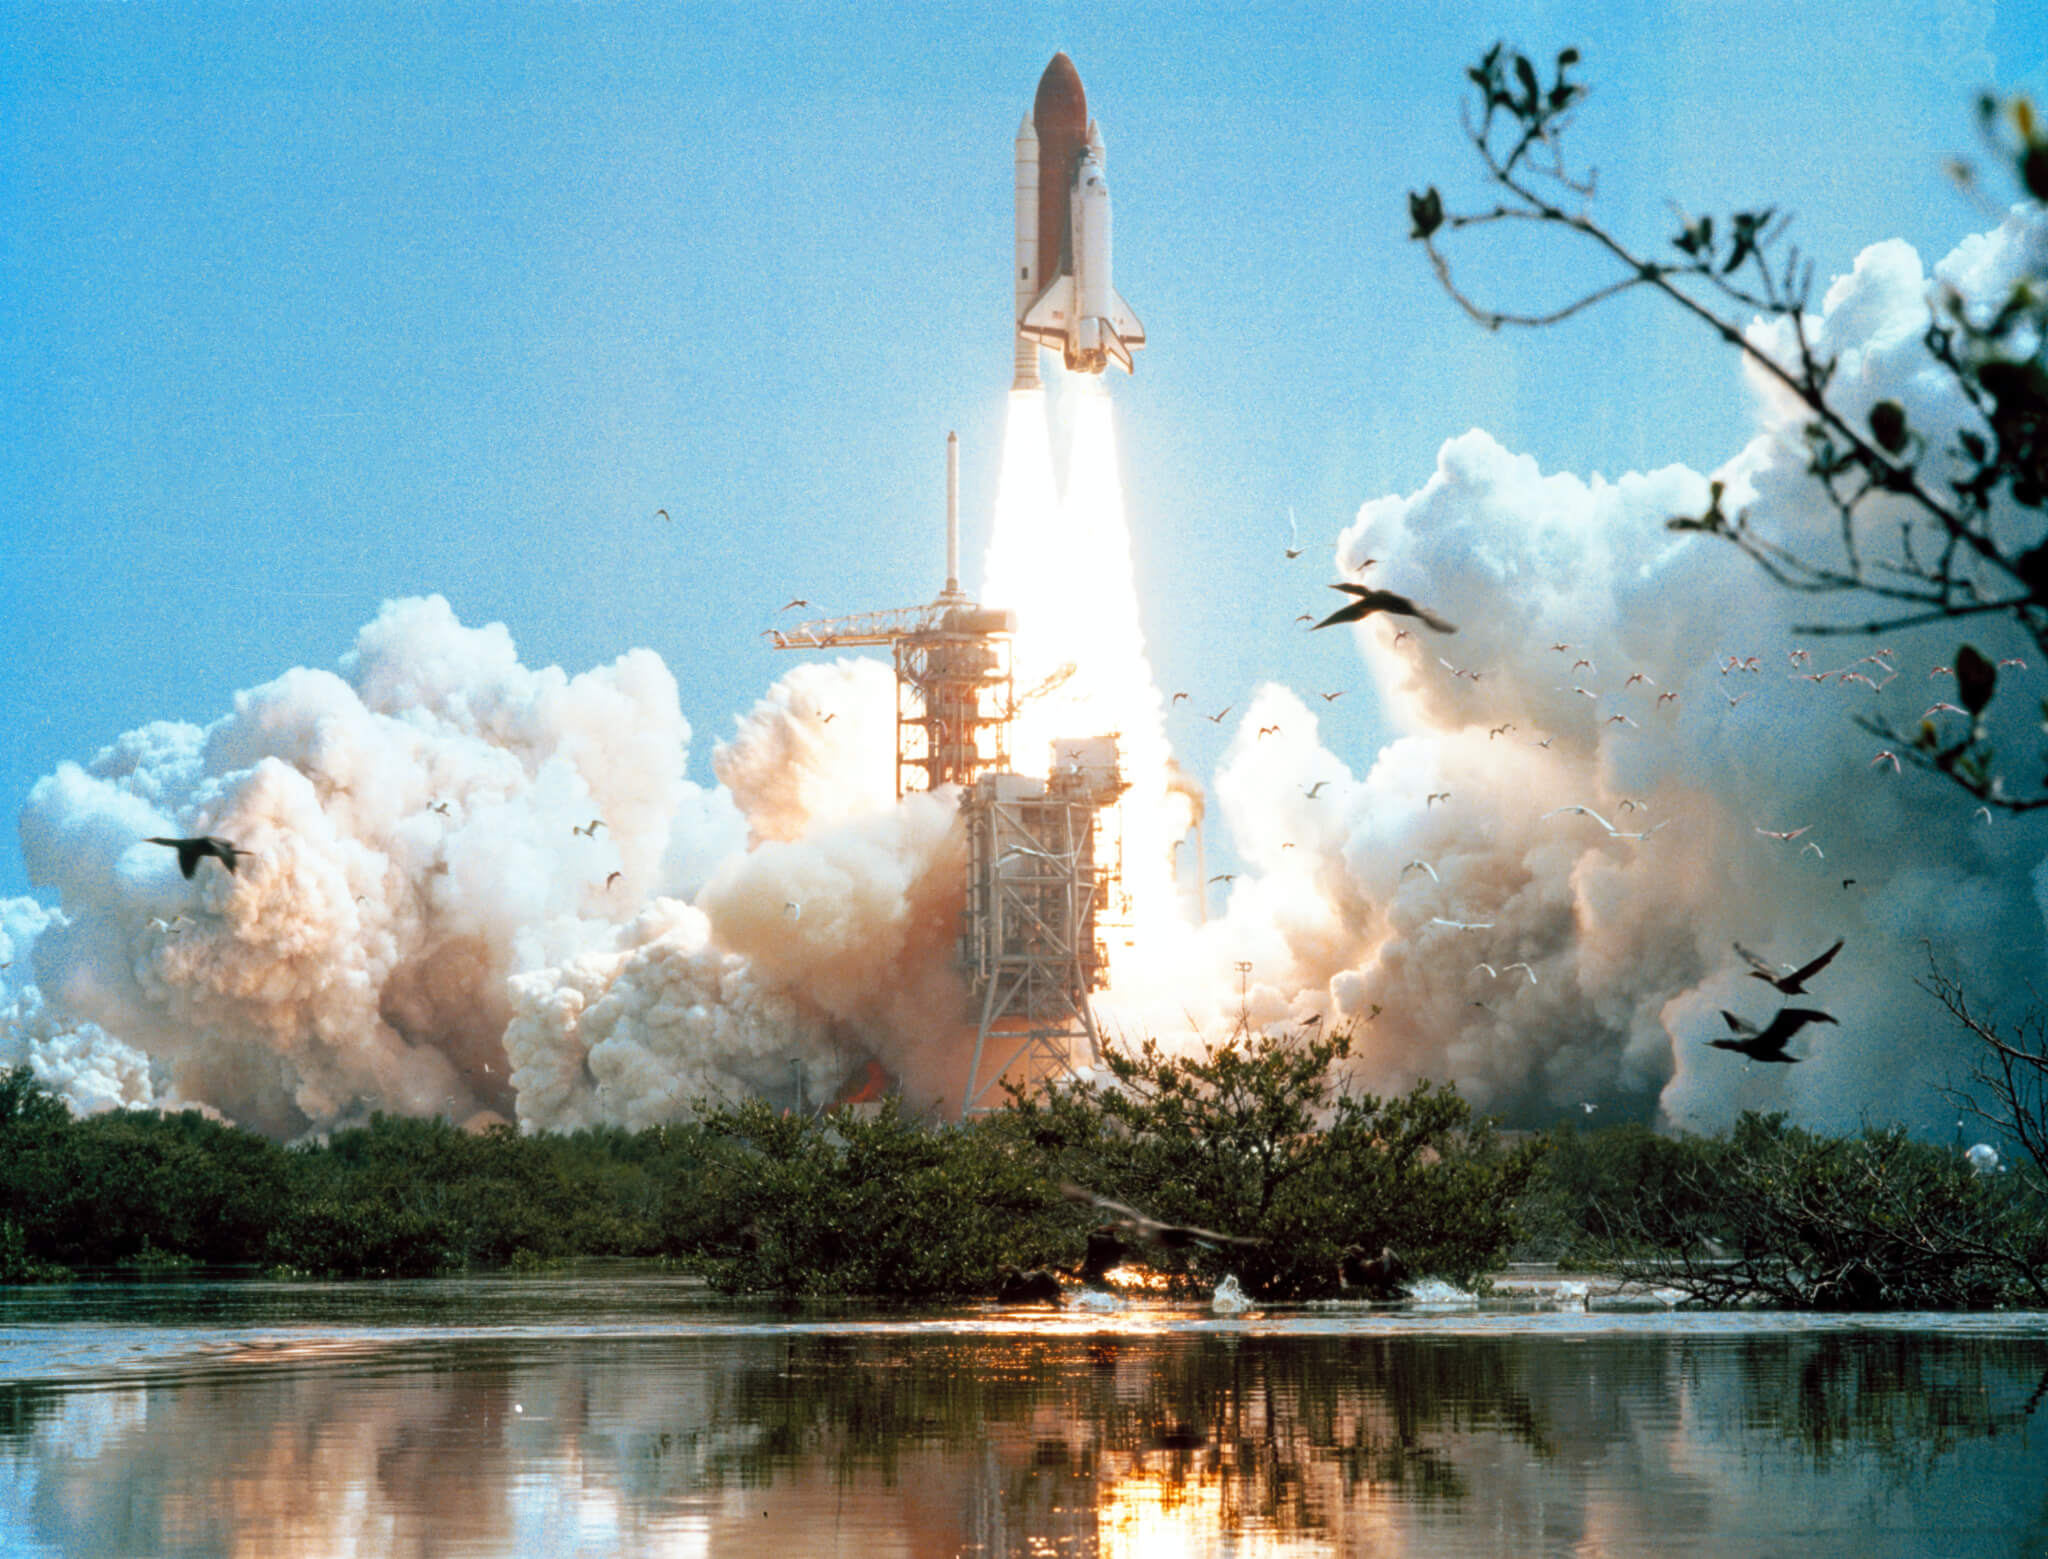 Space Shuttle Columbia's STS-4 mission launched from Kennedy Space Center on June 27, 1982